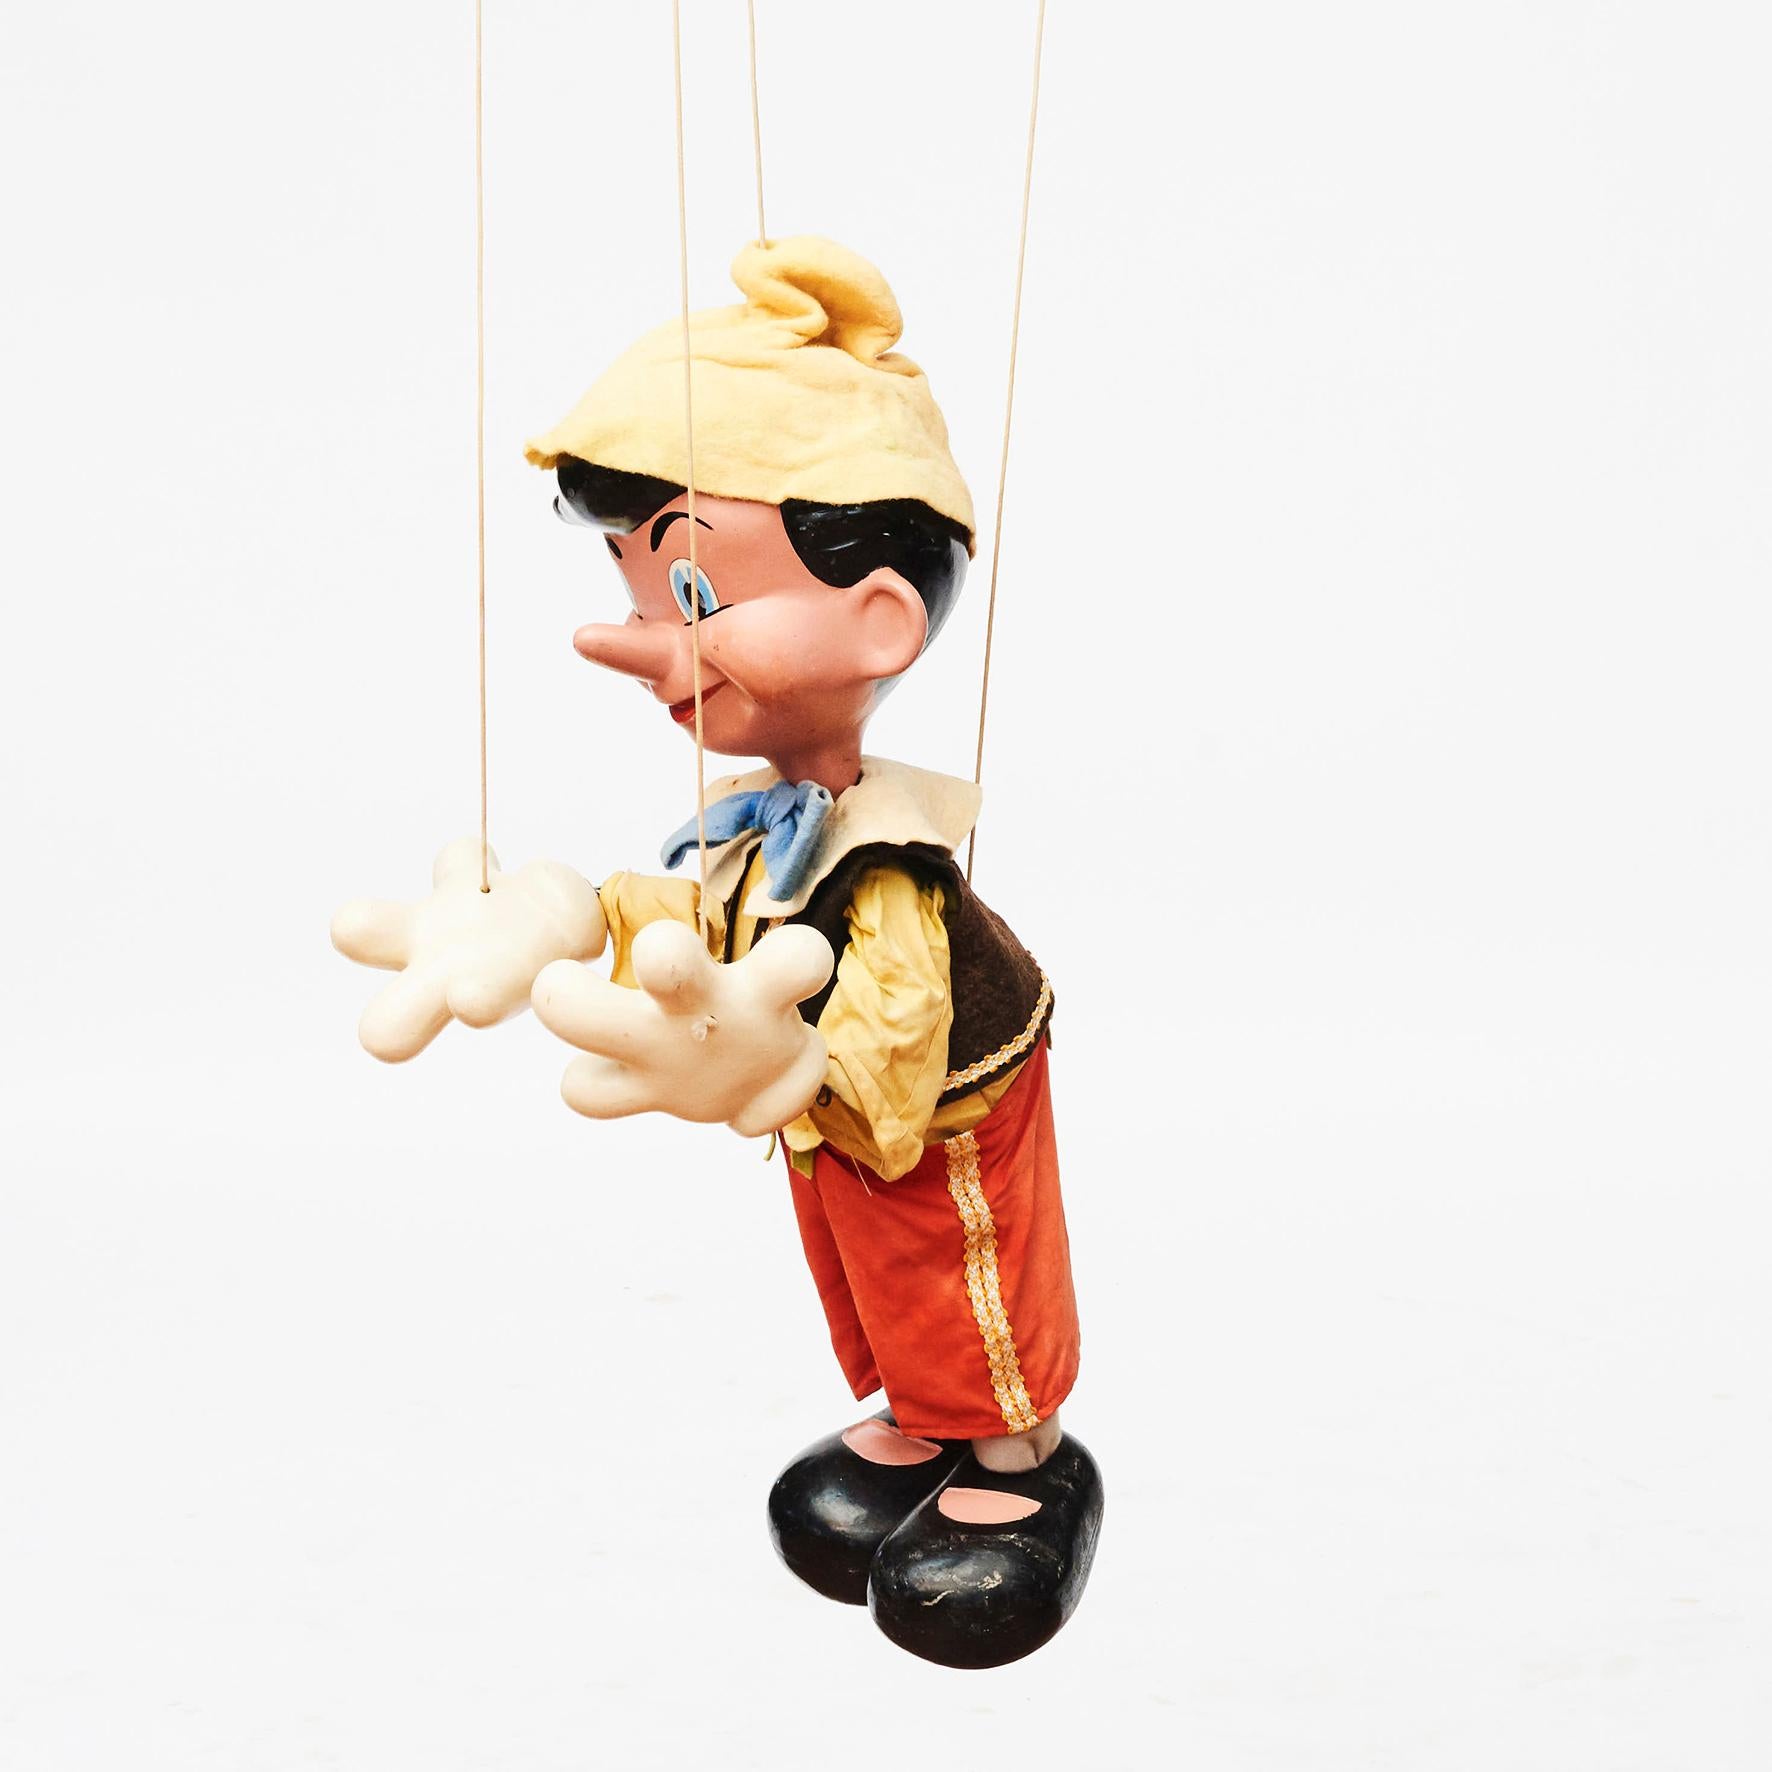 Excellent handmade vintage Pinocchio marionette puppet. 
Modelled after the Walt Disney character by Pelham Puppets, England 1960s.

Features moulded head, hands and feet hand painted with blue eyes and black hair, wood and cloth body. He is